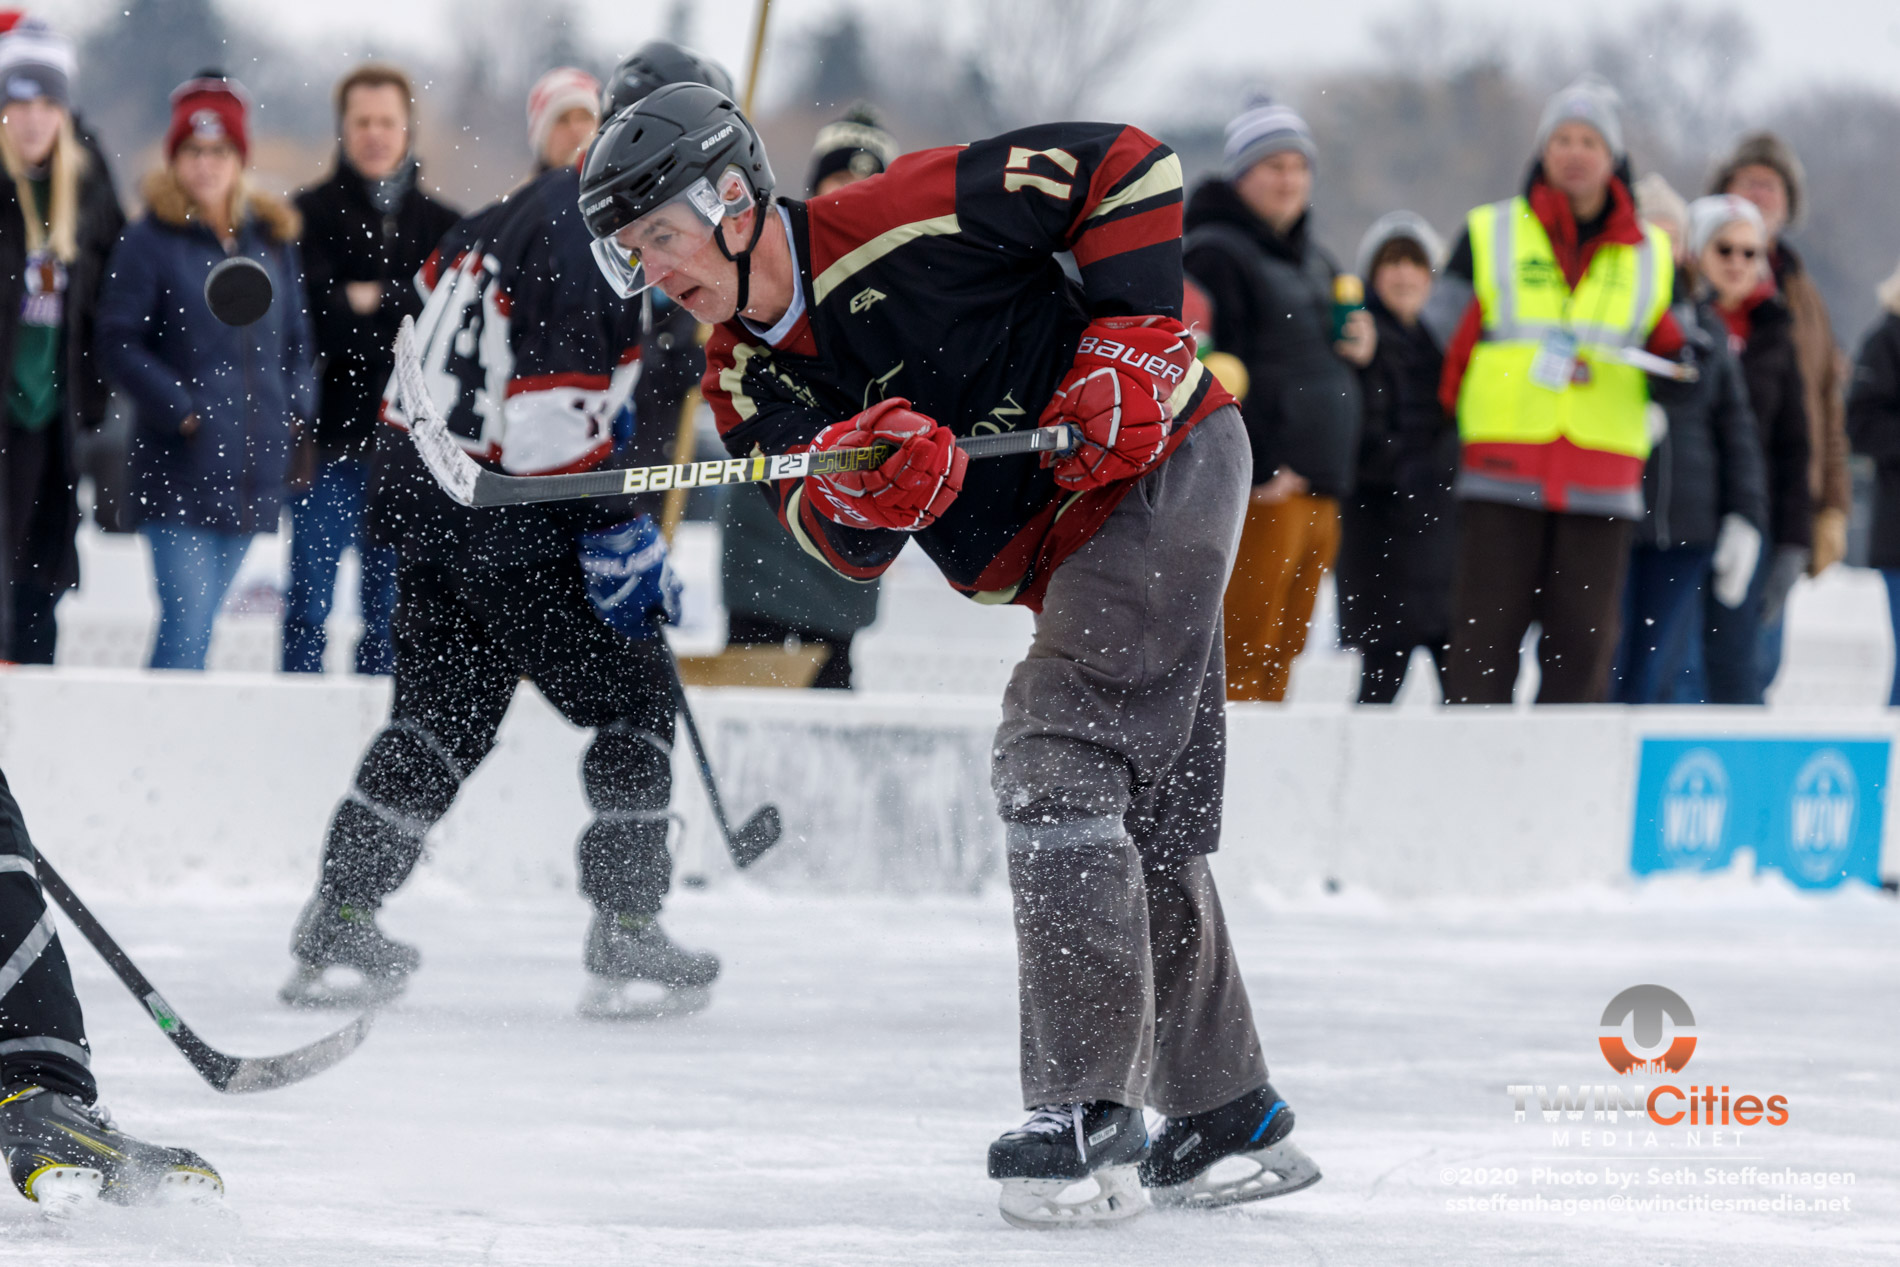 January 26, 2020 - Minneapolis, Minnesota, United States -  Tradition Mortgage play Wright Homes/4 Star for the 40+ Open championship during the U.S. Pond Hockey Championships on Lake Nokomis. 

(Photo by Seth Steffenhagen/Steffenhagen Photography)